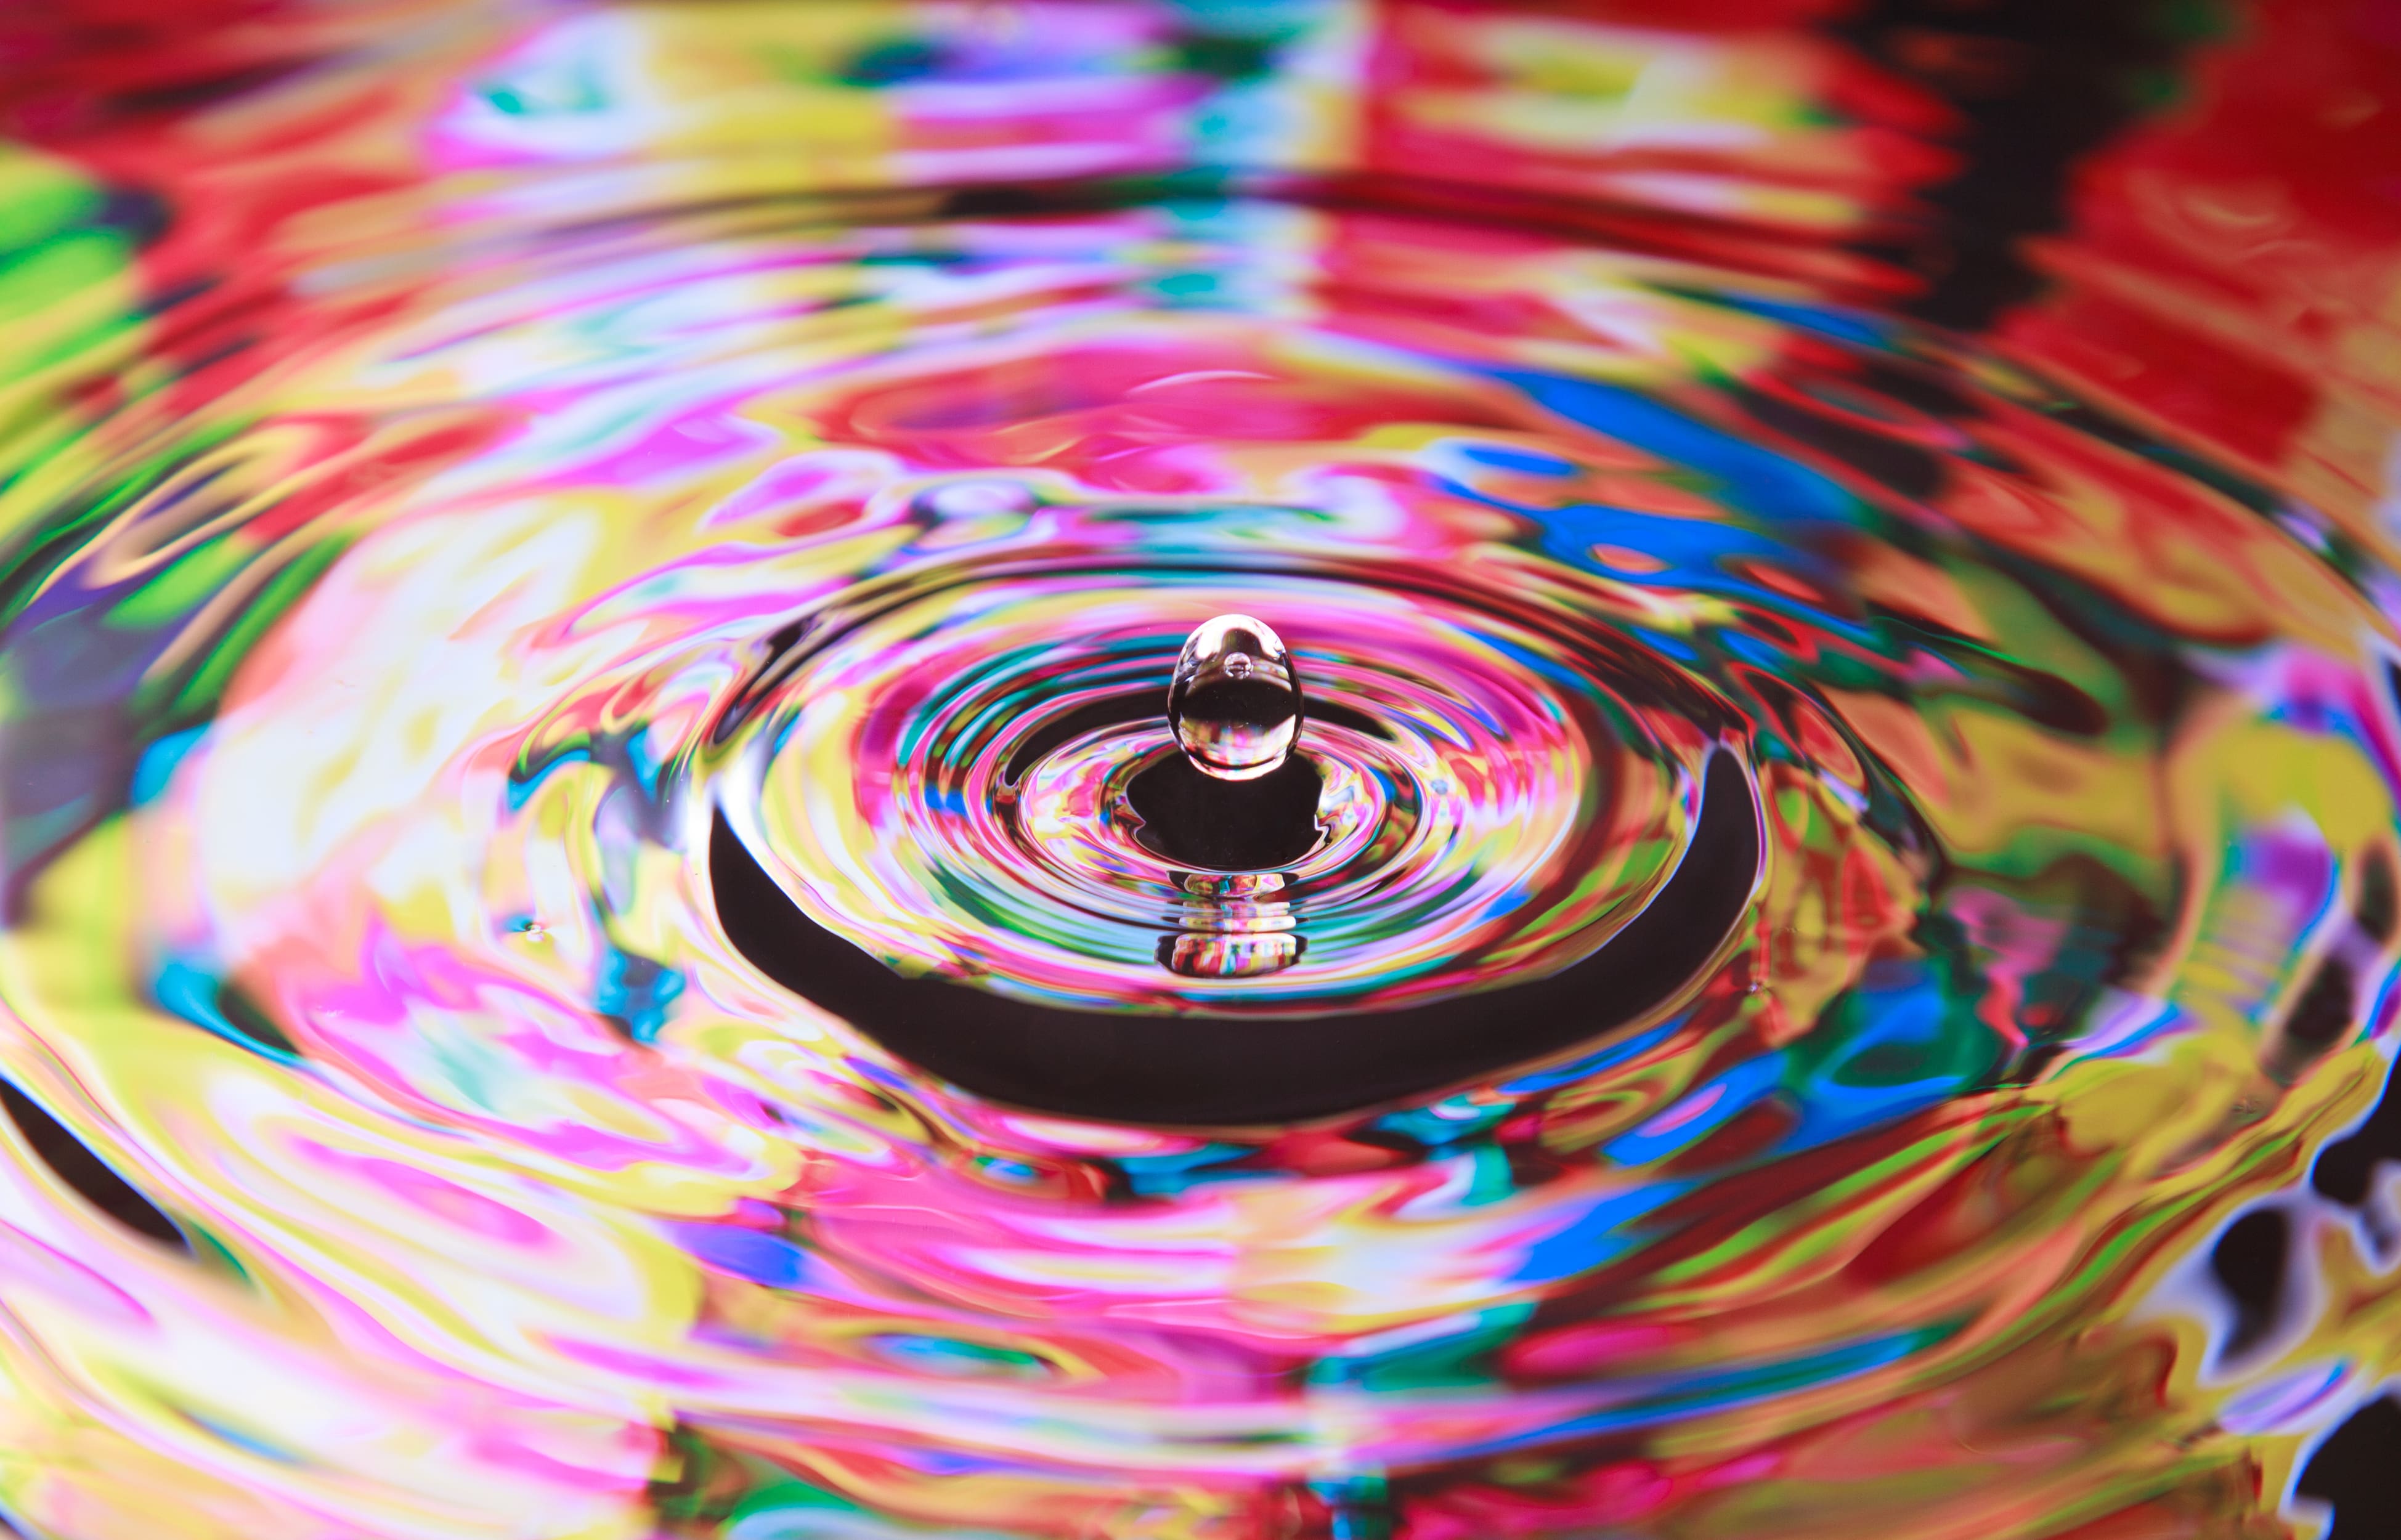 I. Introduction to Water Splash Photography